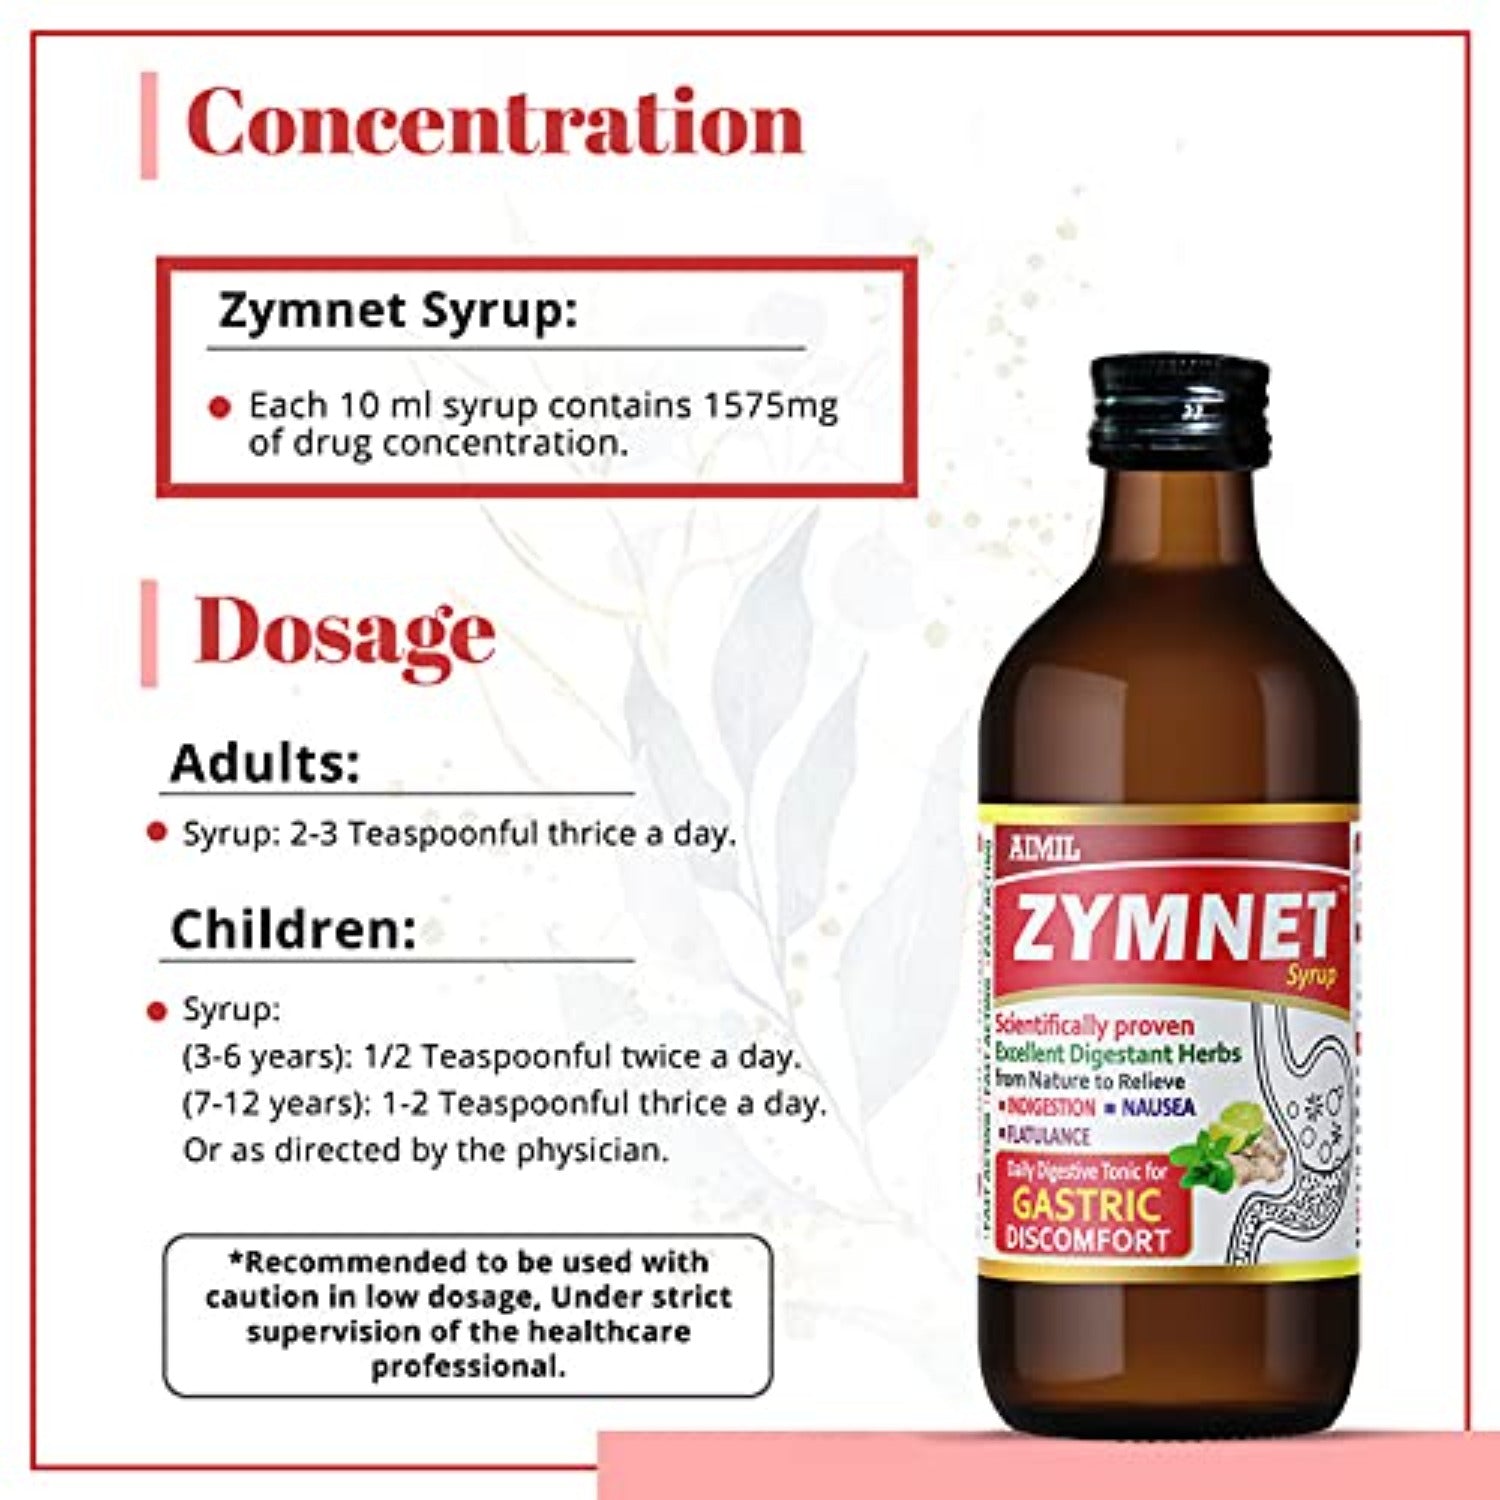 Aimil Ayurvedic Zymnet Plus Syrup For Digestive Health & Acidity Relieves Gastric Discomforts Abdominal Pains & Nausea Syrup